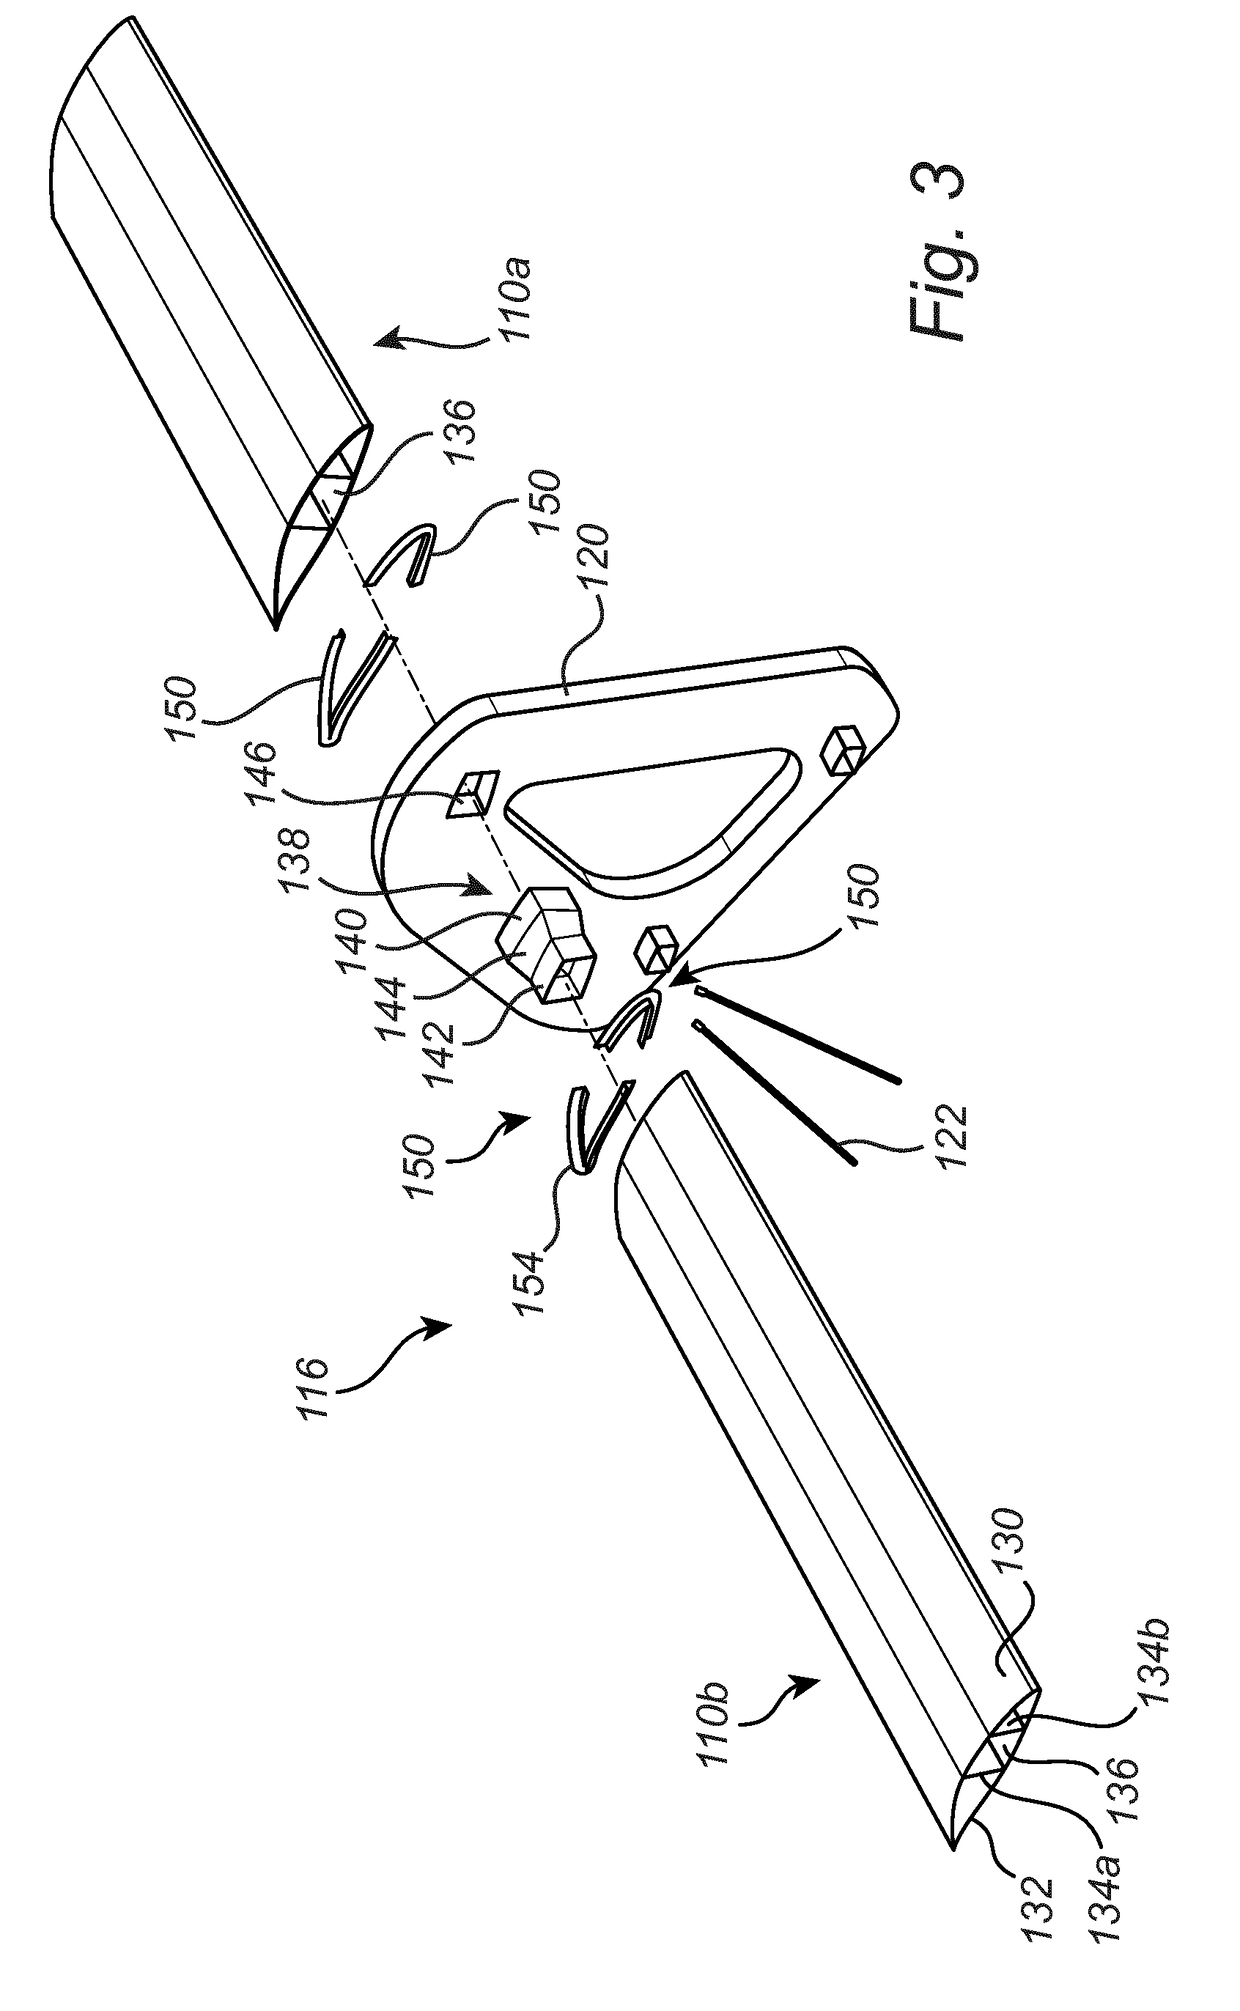 Rotor Blade for a Wind Turbine